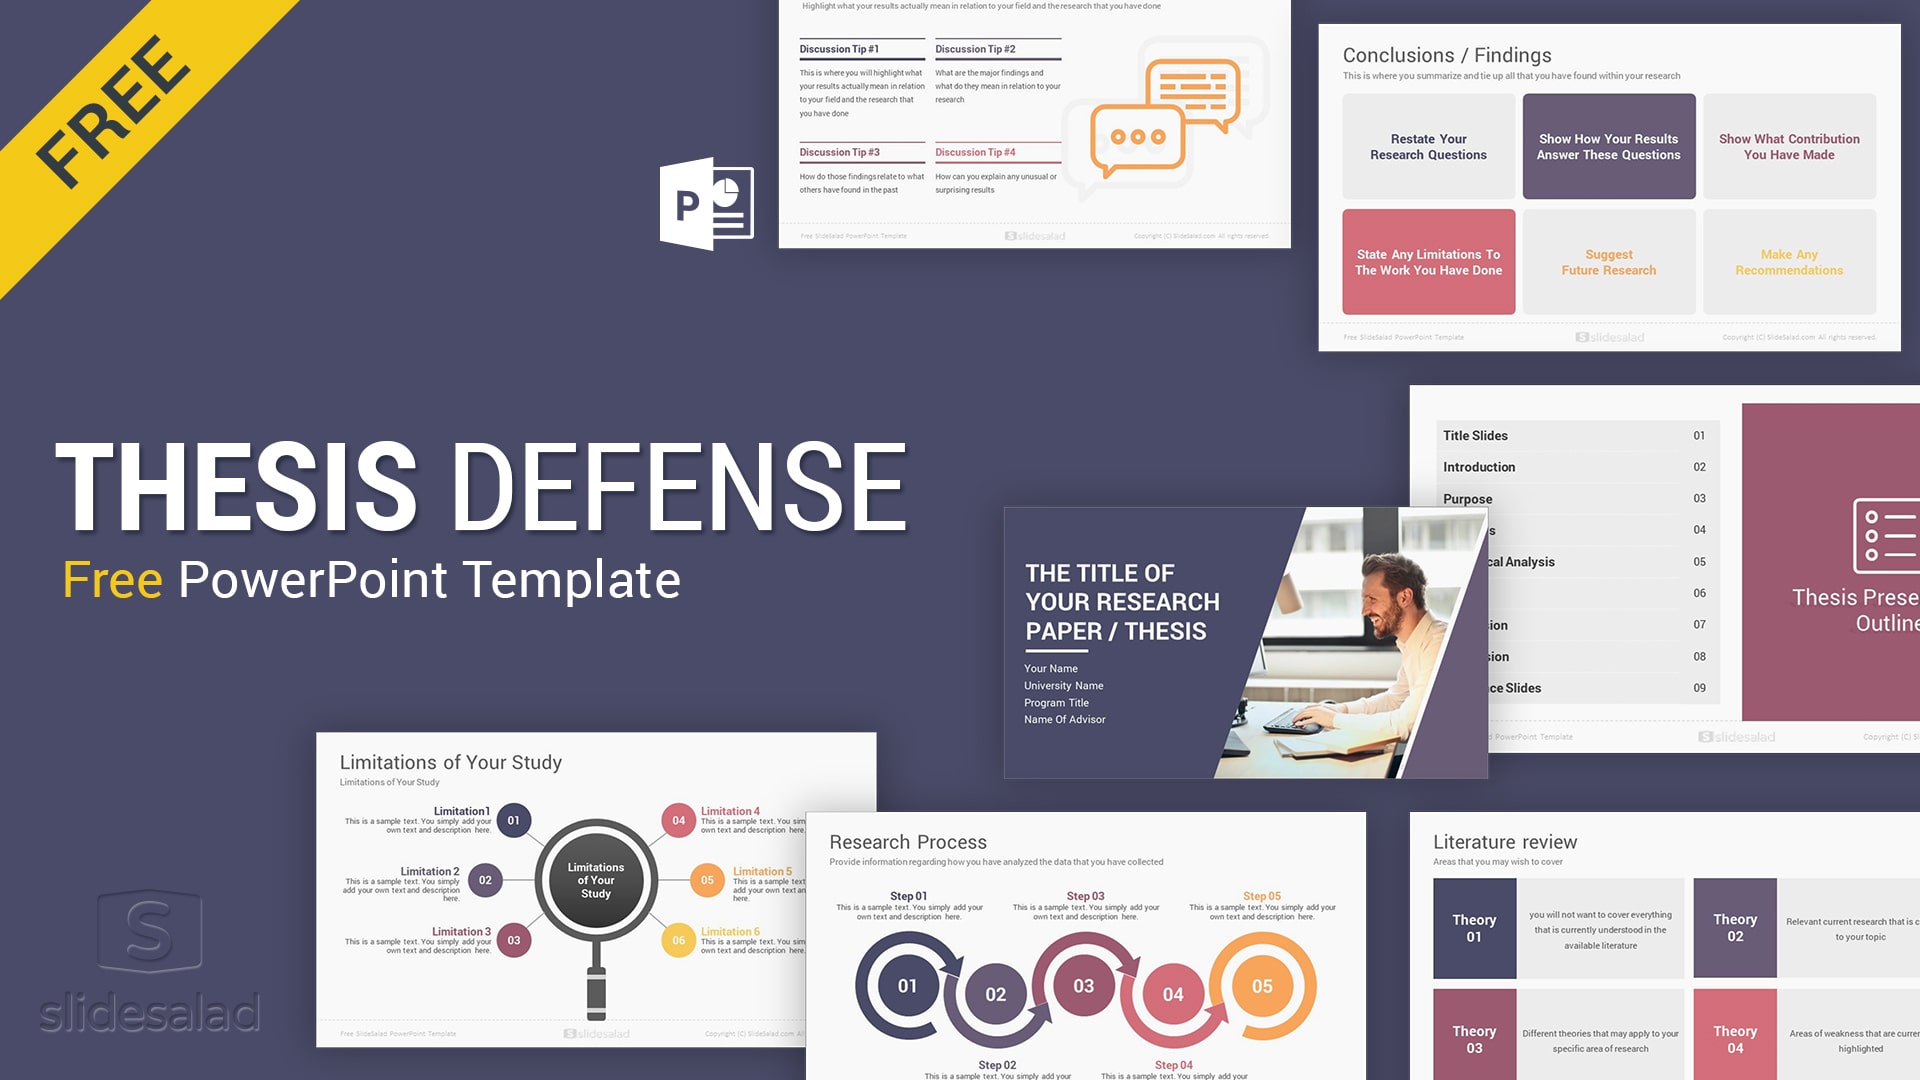 Master S Thesis Defense Powerpoint Template Design Slidesalad